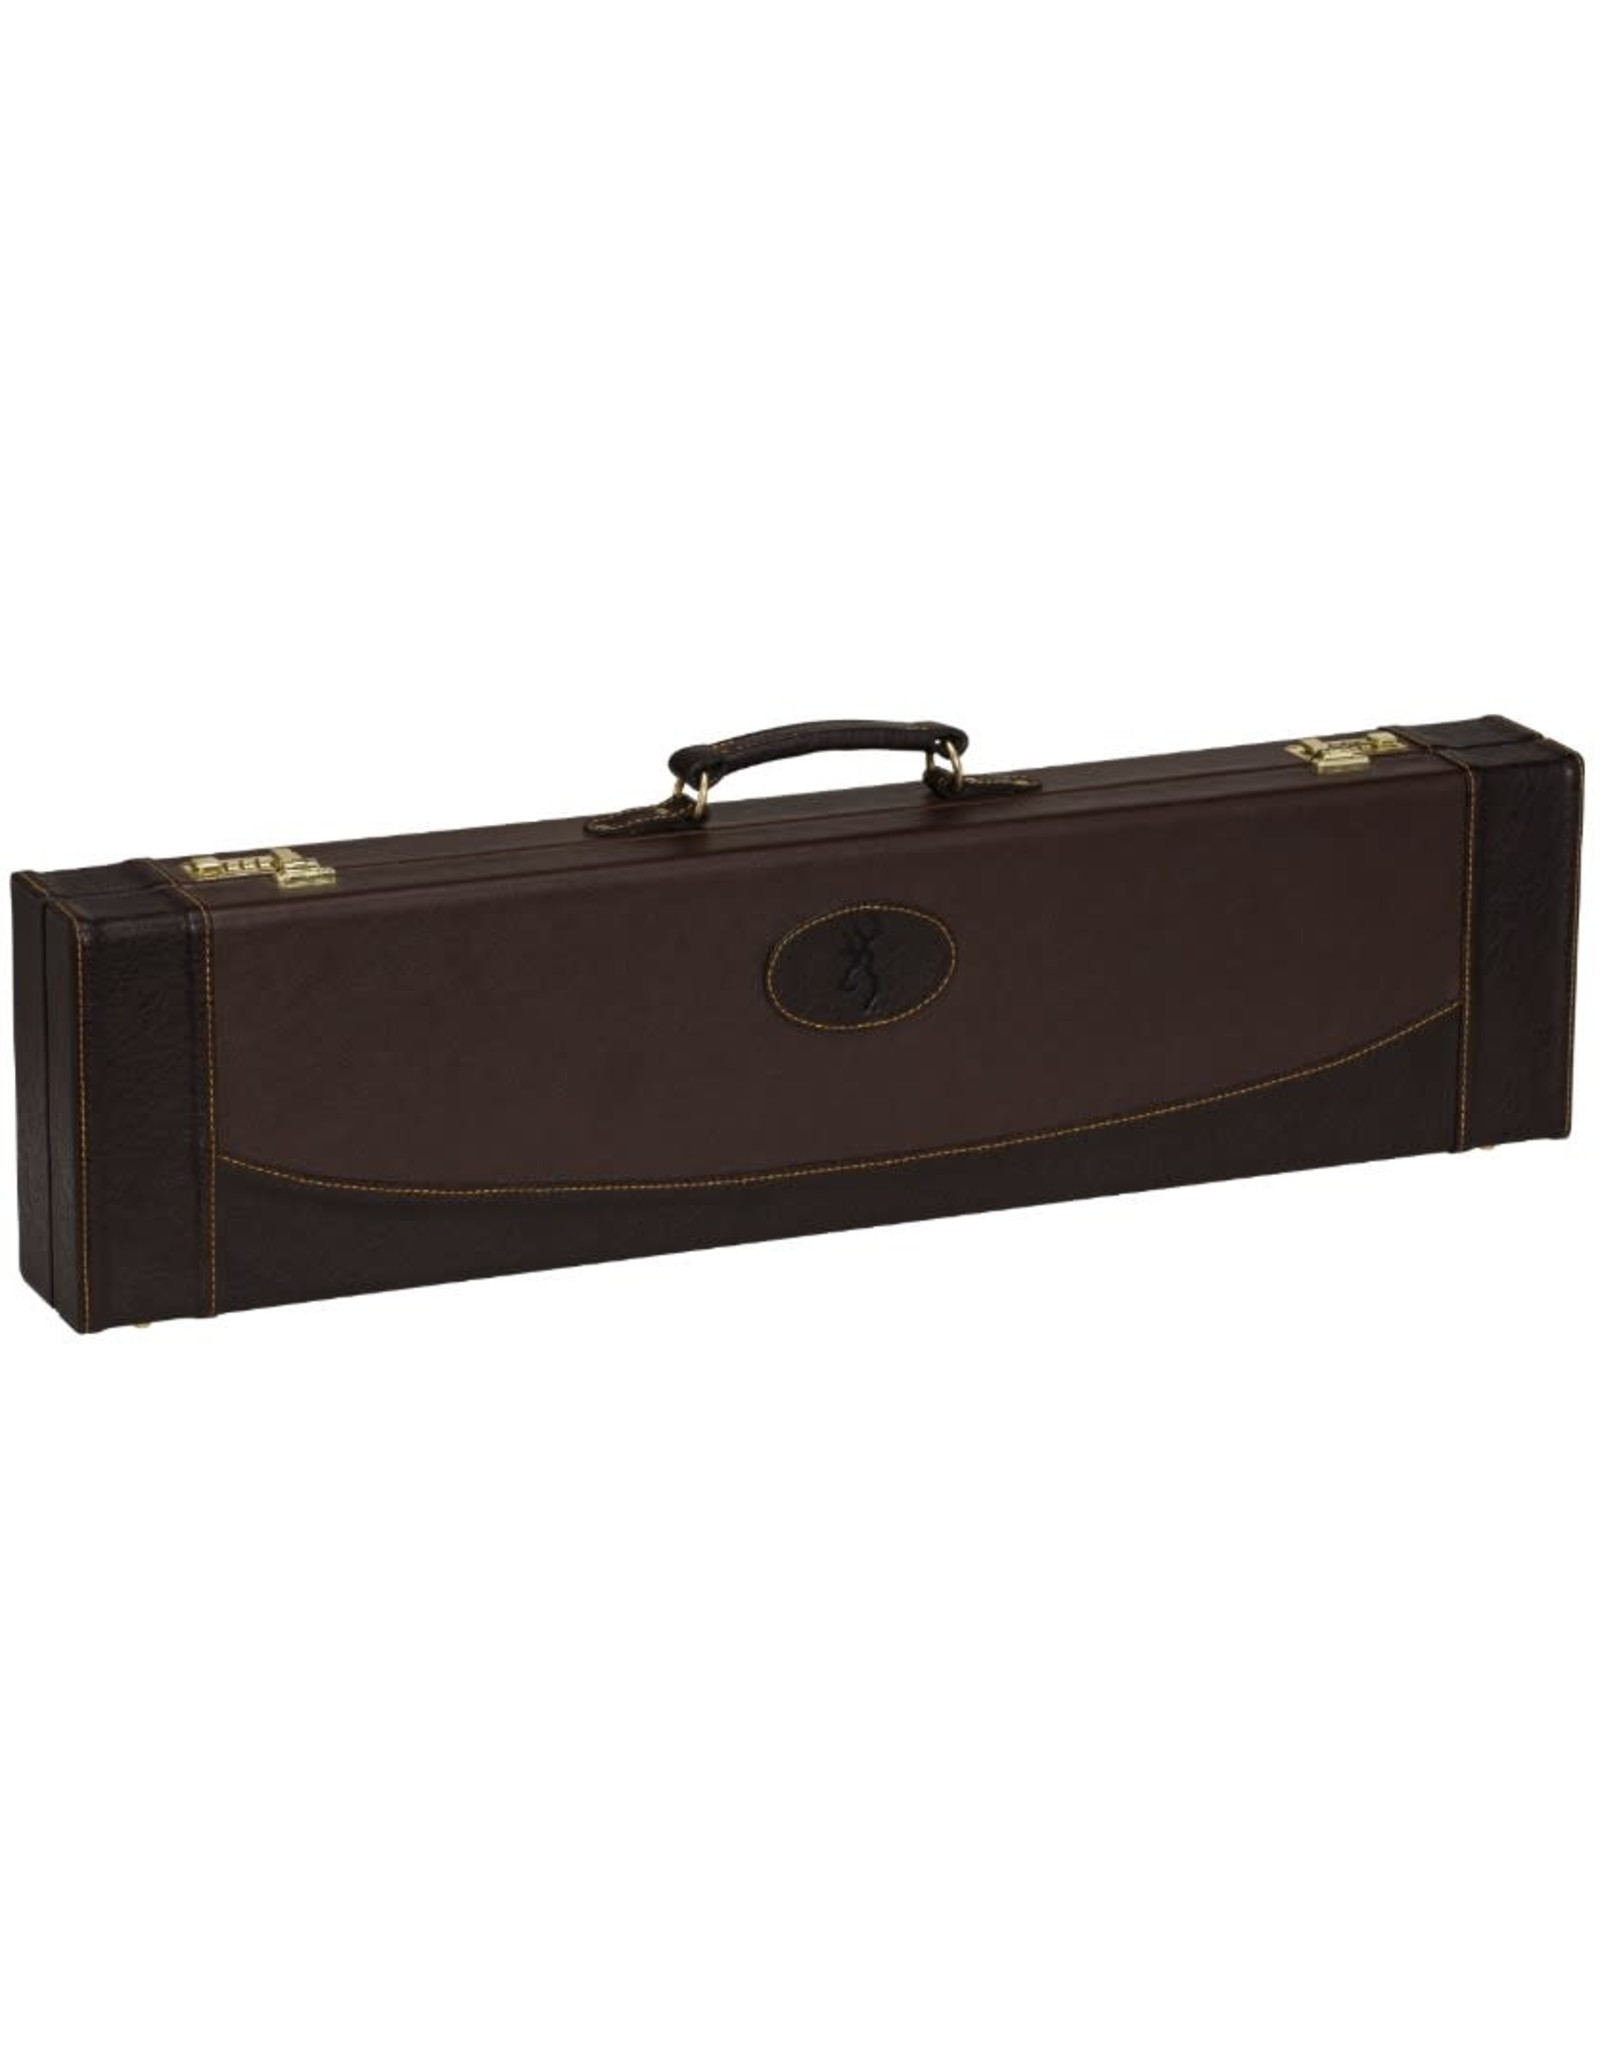 Browning Browning Encini II Fitted Hard Case - Chestnut/Coffee